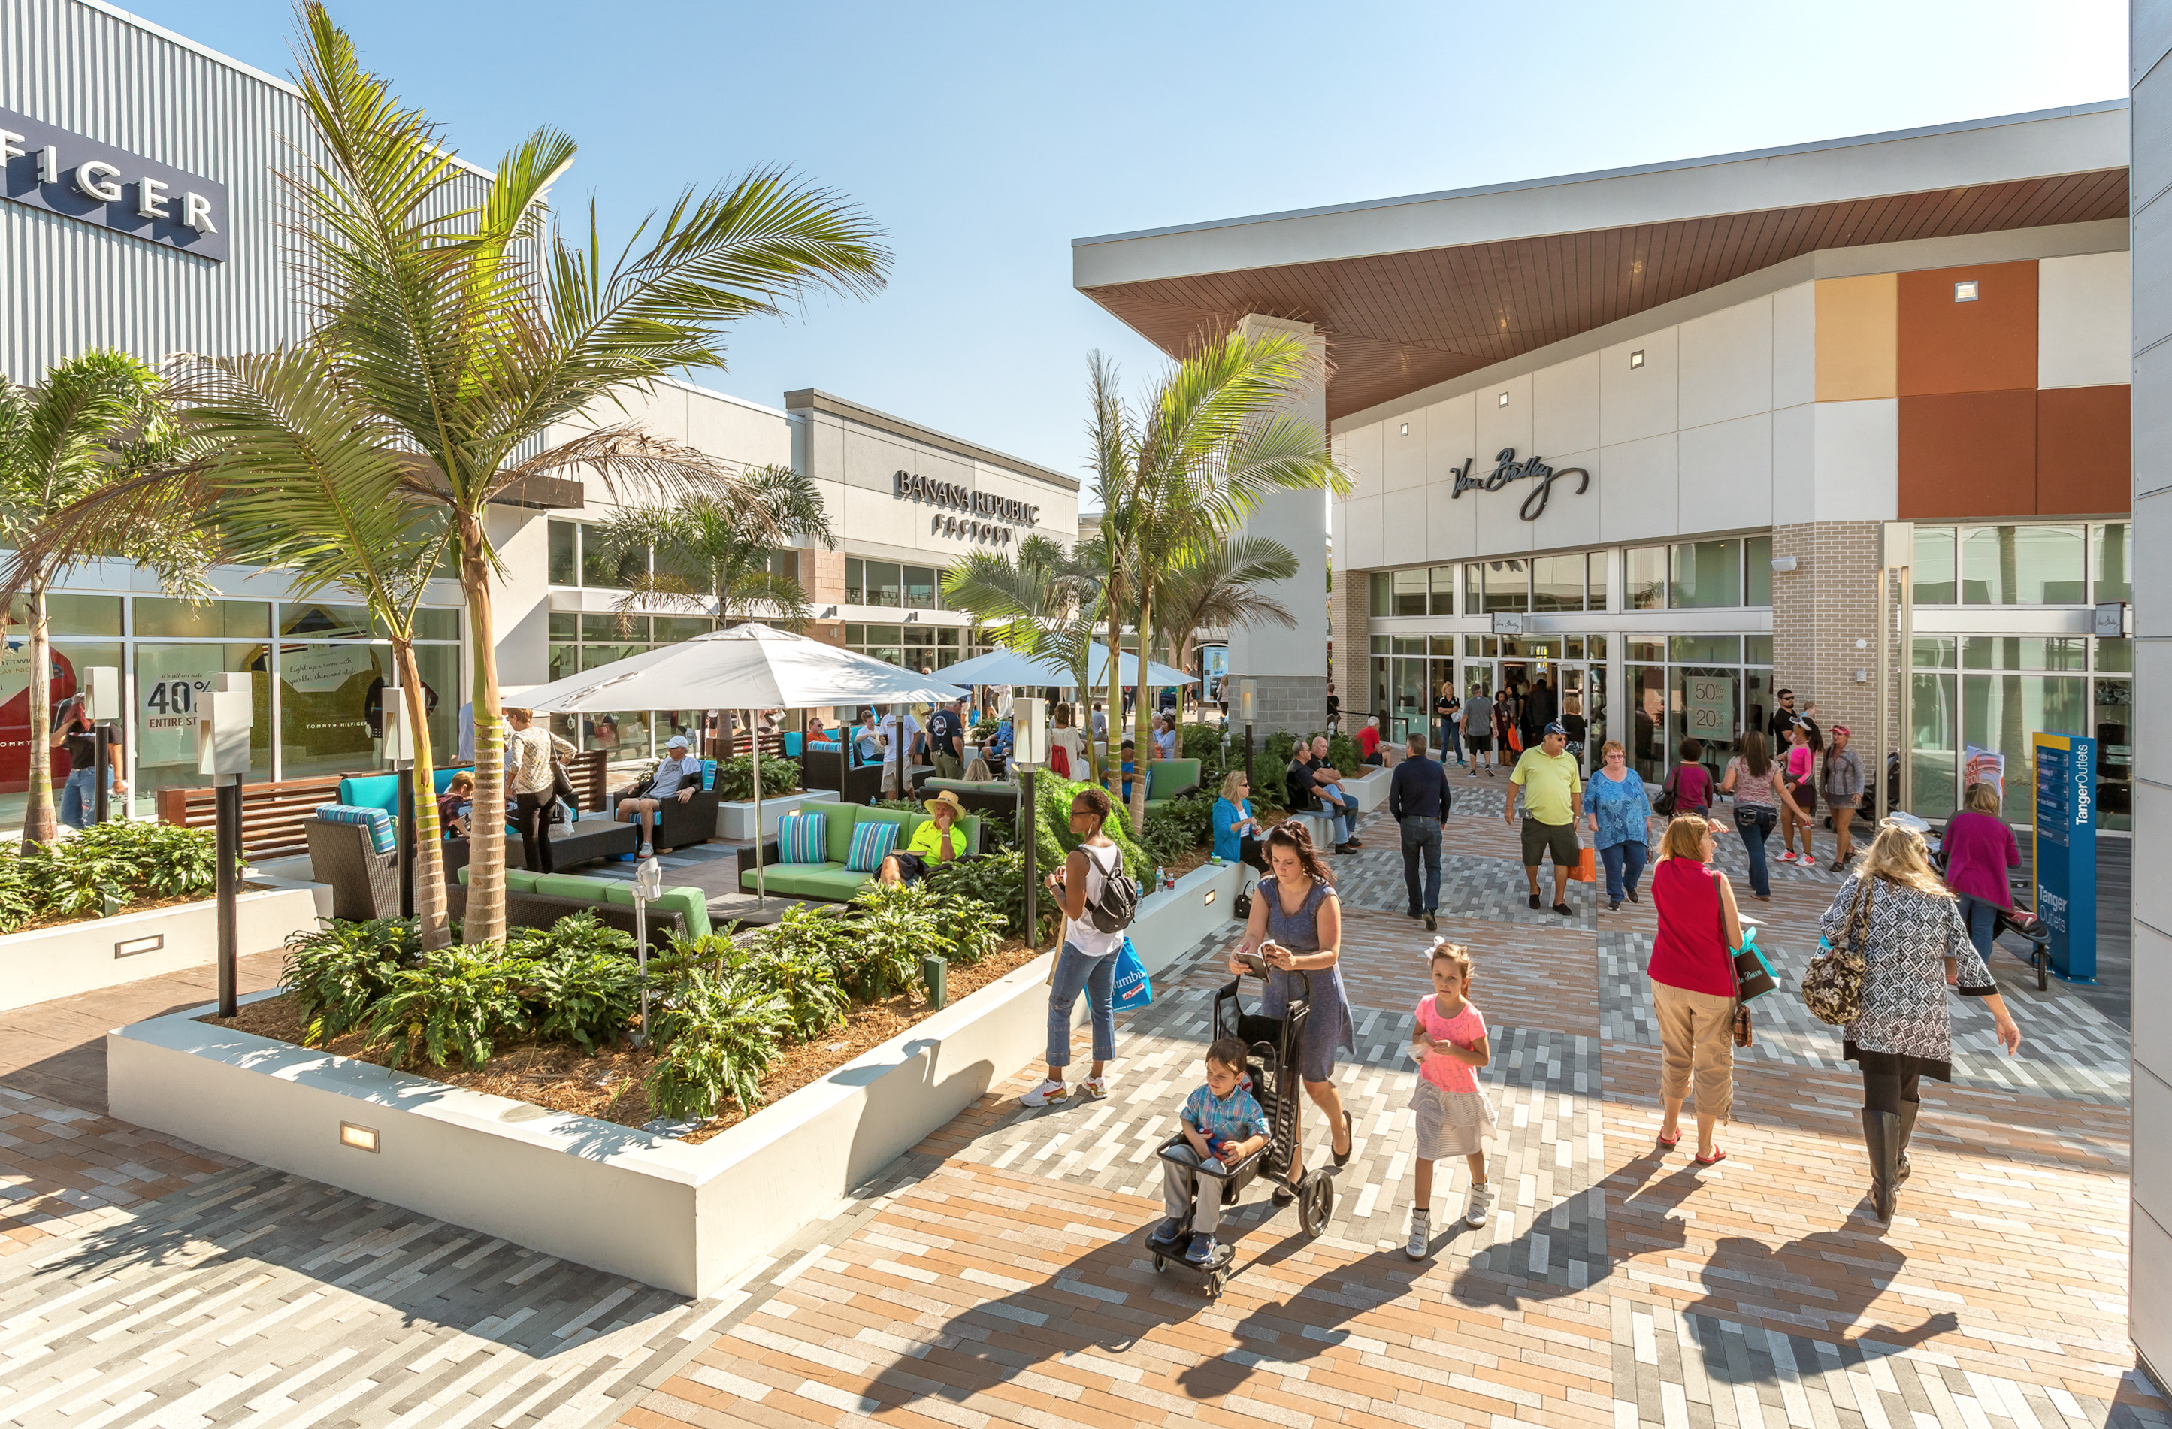 Tanger Outlets, Daytona Beach - Visit Vera Bradley Factory Outlet Stores  through May 26th and enjoy 70% off the entire store! . Visit us today, Vera  Bradley, located at Suite 955.